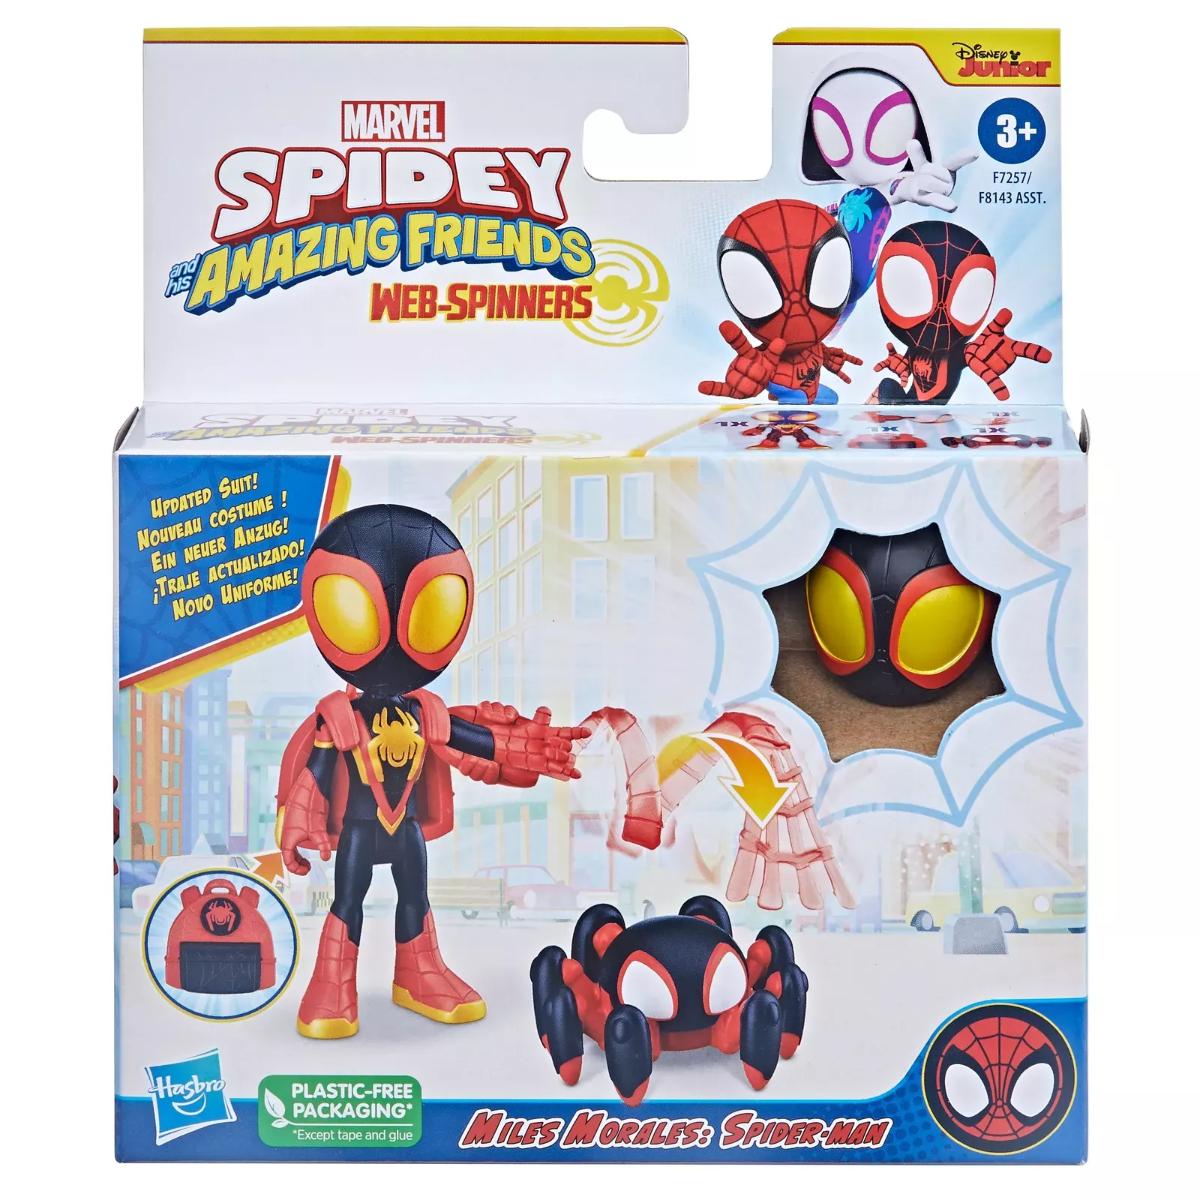 Figurina cu spinner, Spidey, Web-Spinners, Miles Morales, F7257